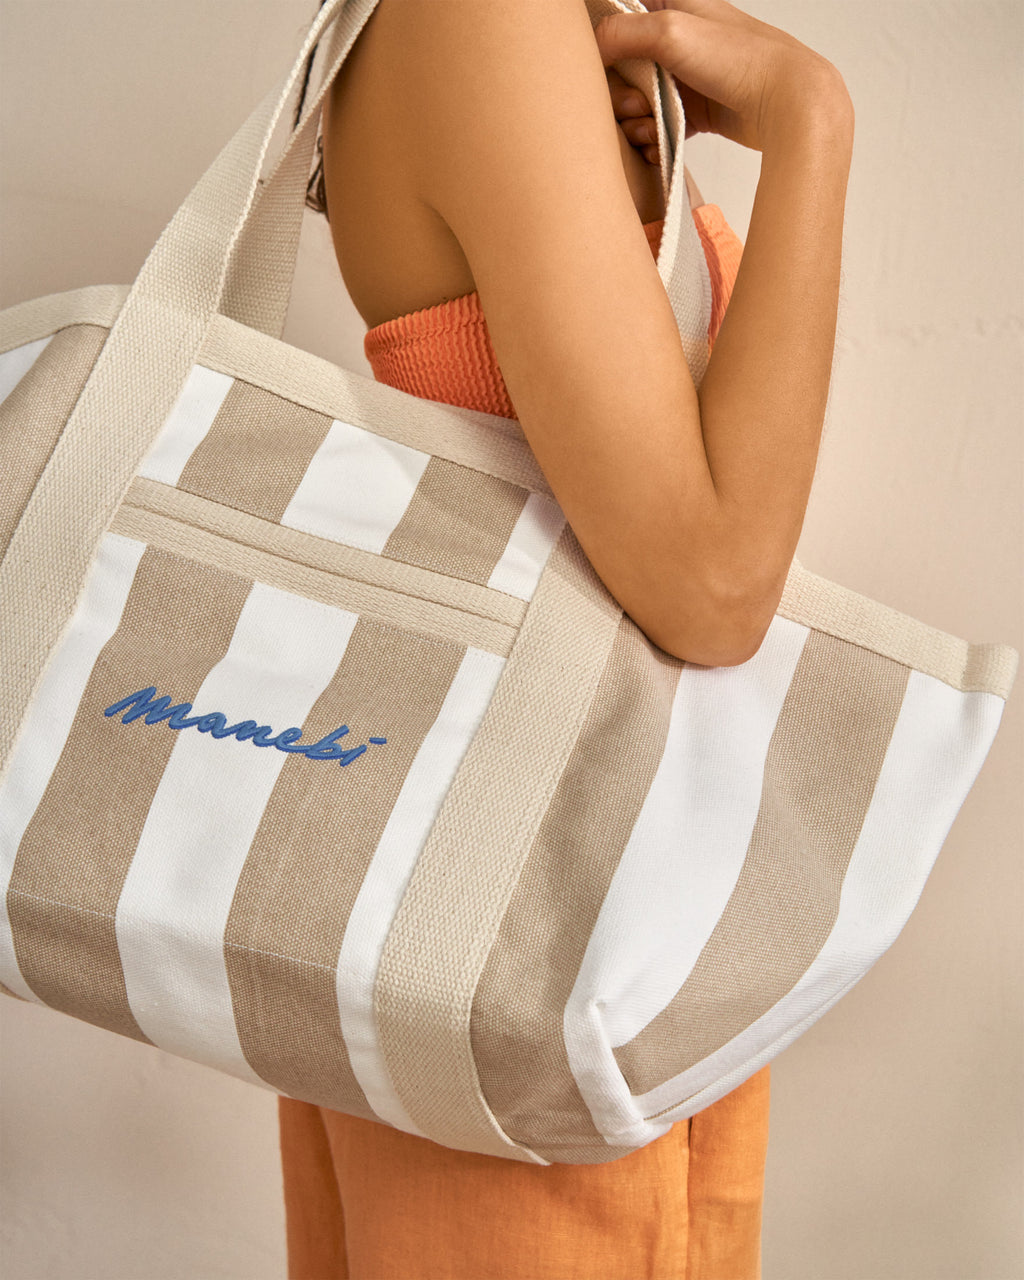 Canvas Tote Bag - White And Beige Stripes